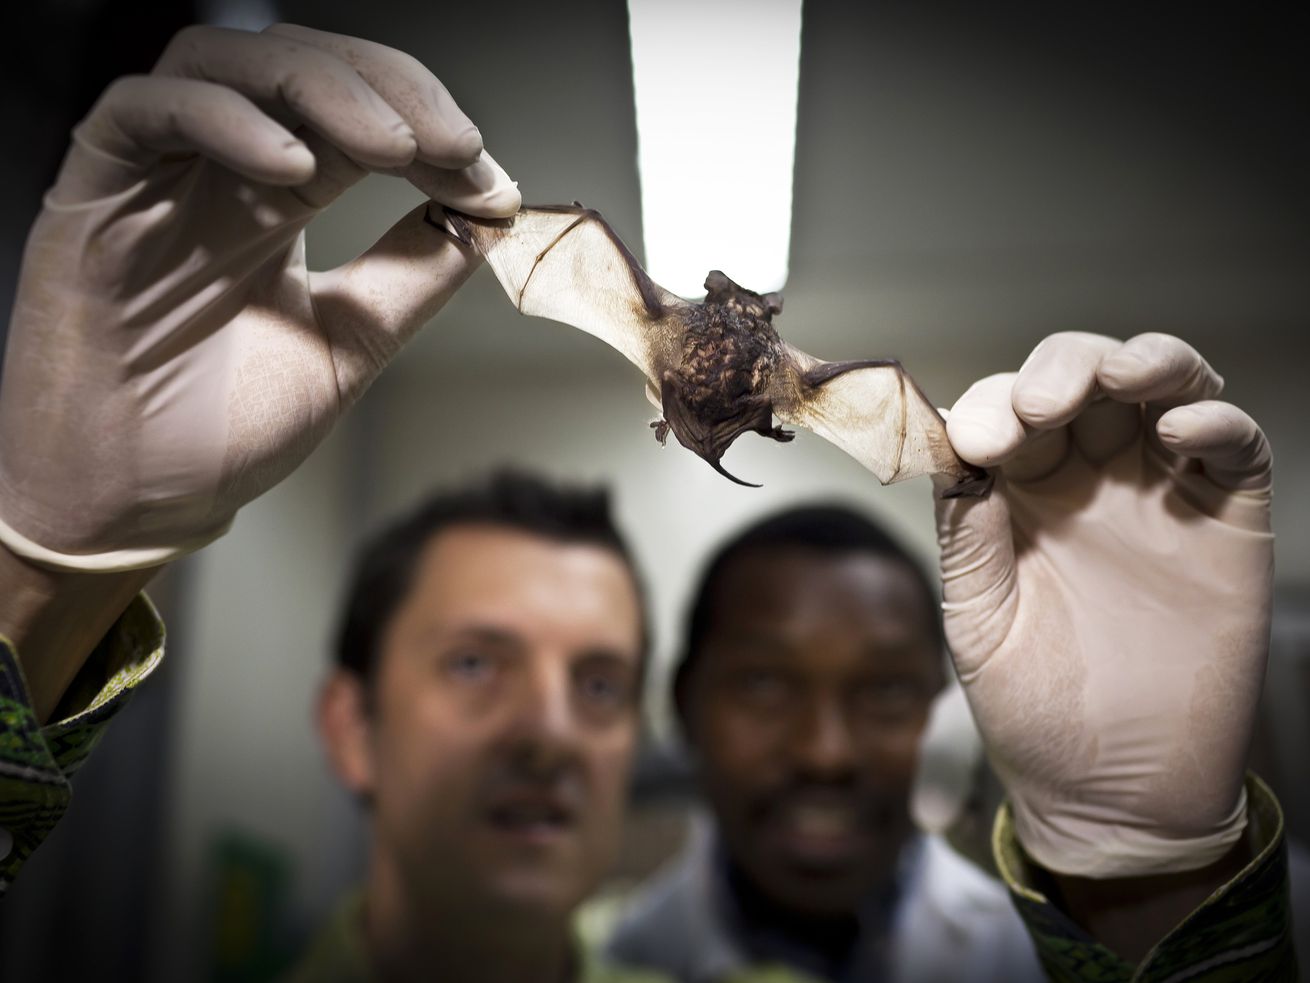 A pair of hands wearing surgical gloves holds a bat up to the light as two scientists look on in the background.